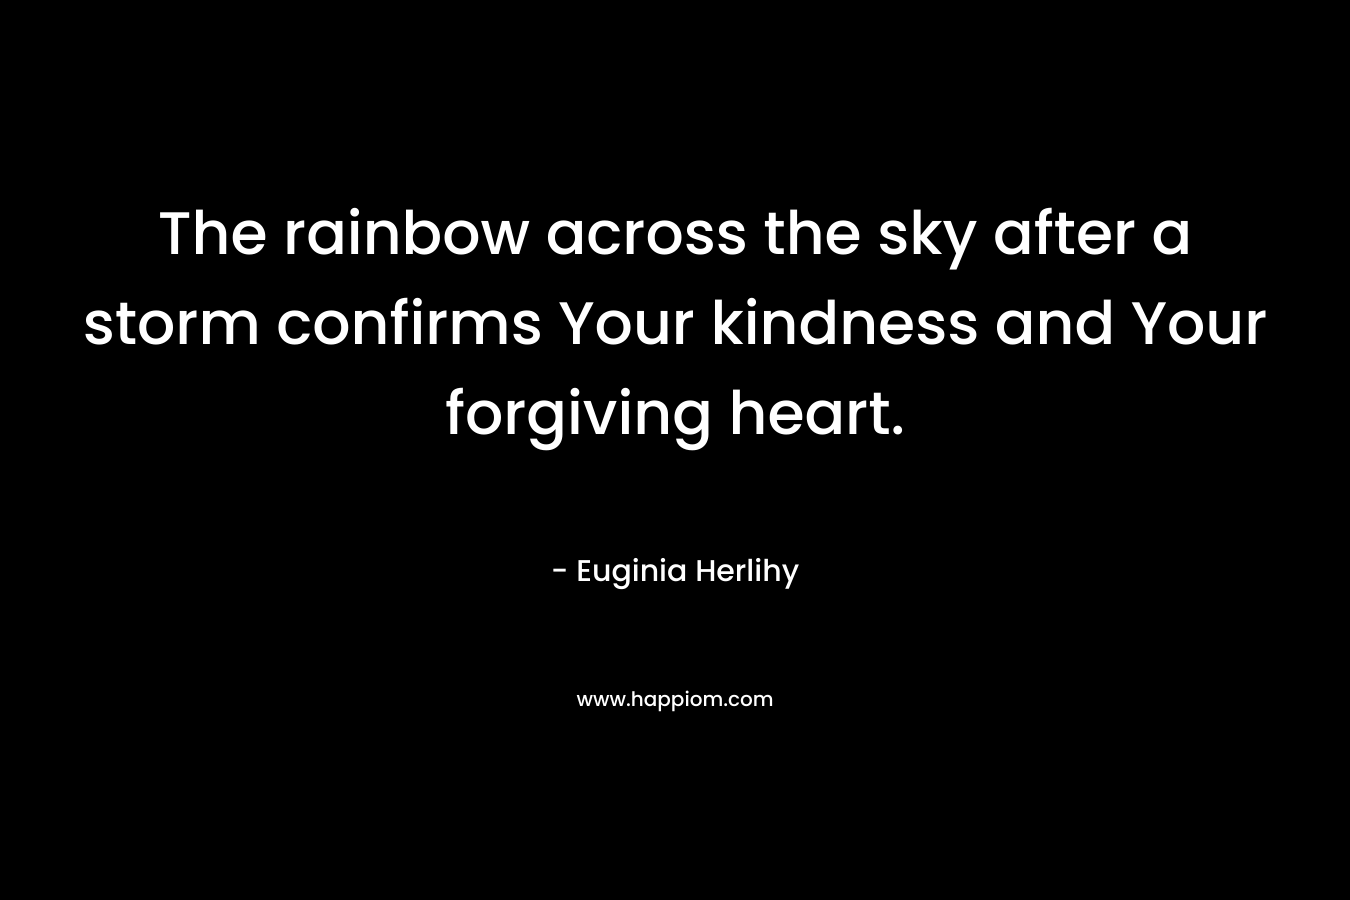 The rainbow across the sky after a storm confirms Your kindness and Your forgiving heart.